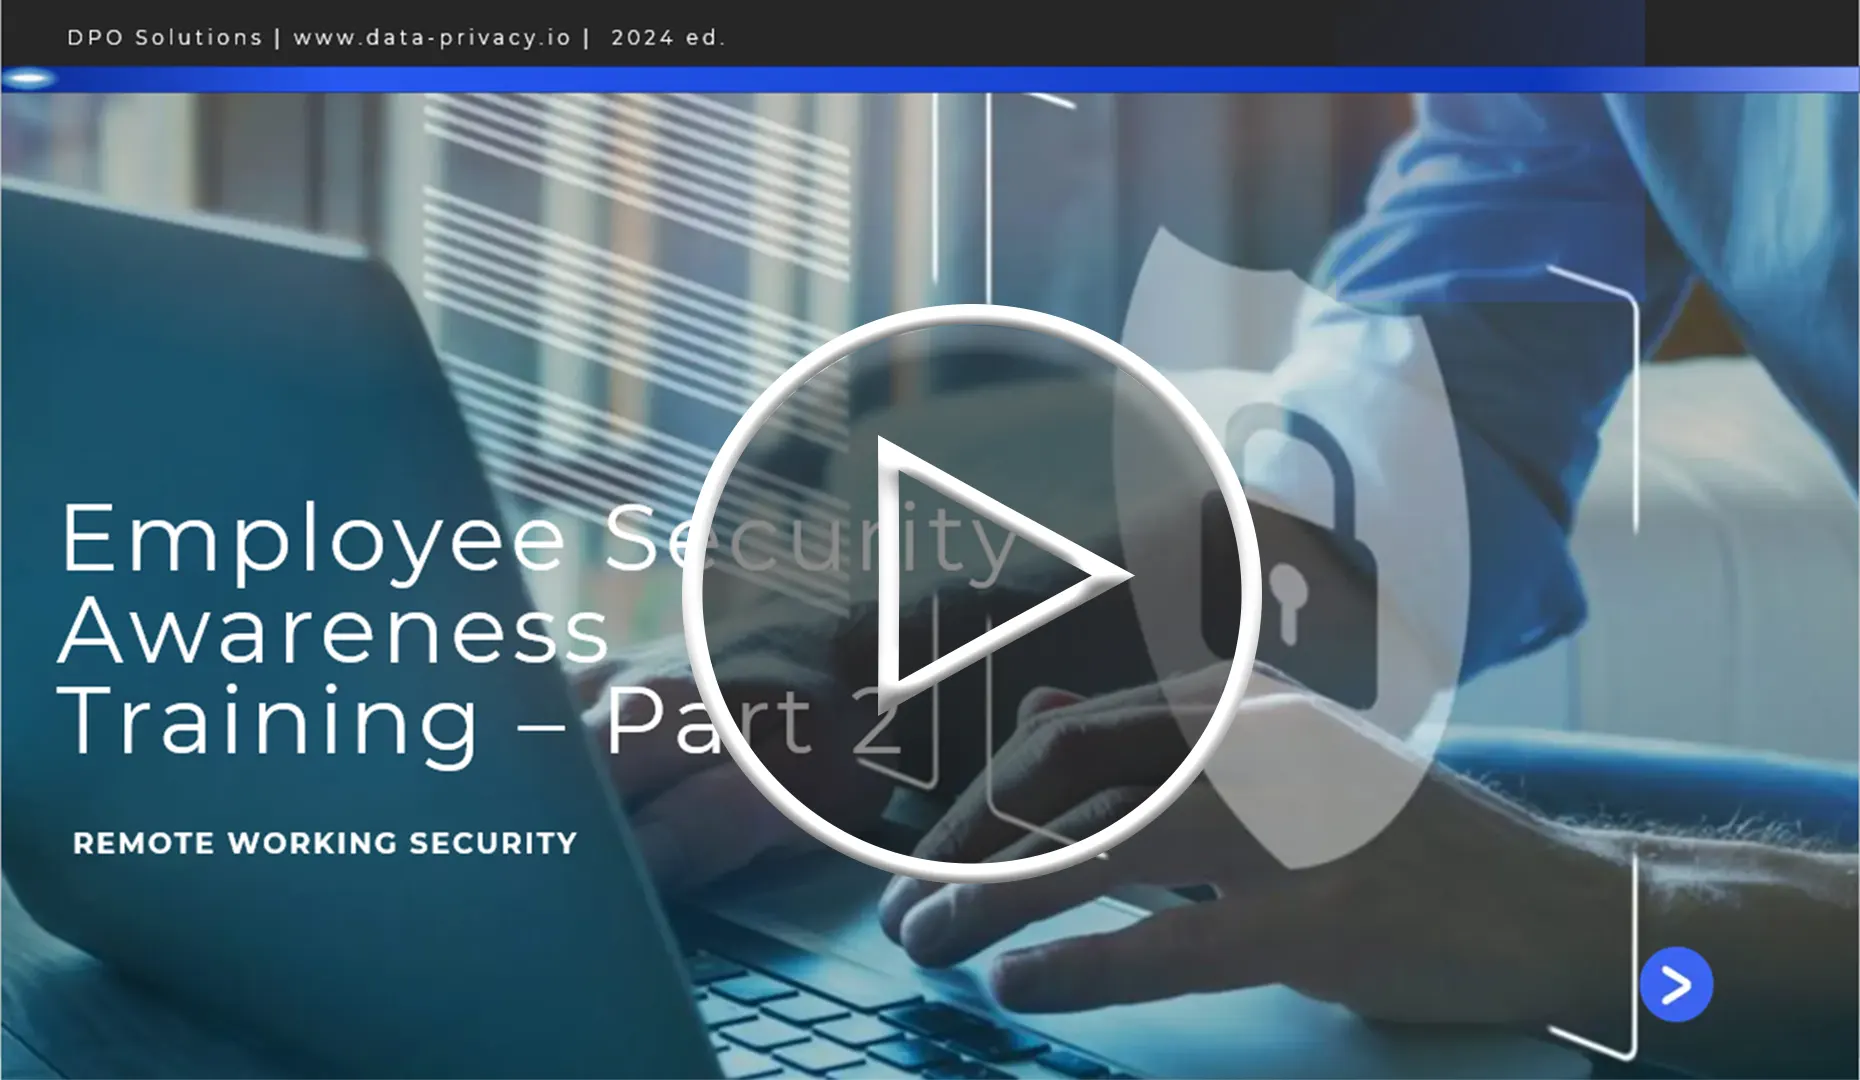 Cybersecurity awareness training Module 2 Preview - Remote Working Security